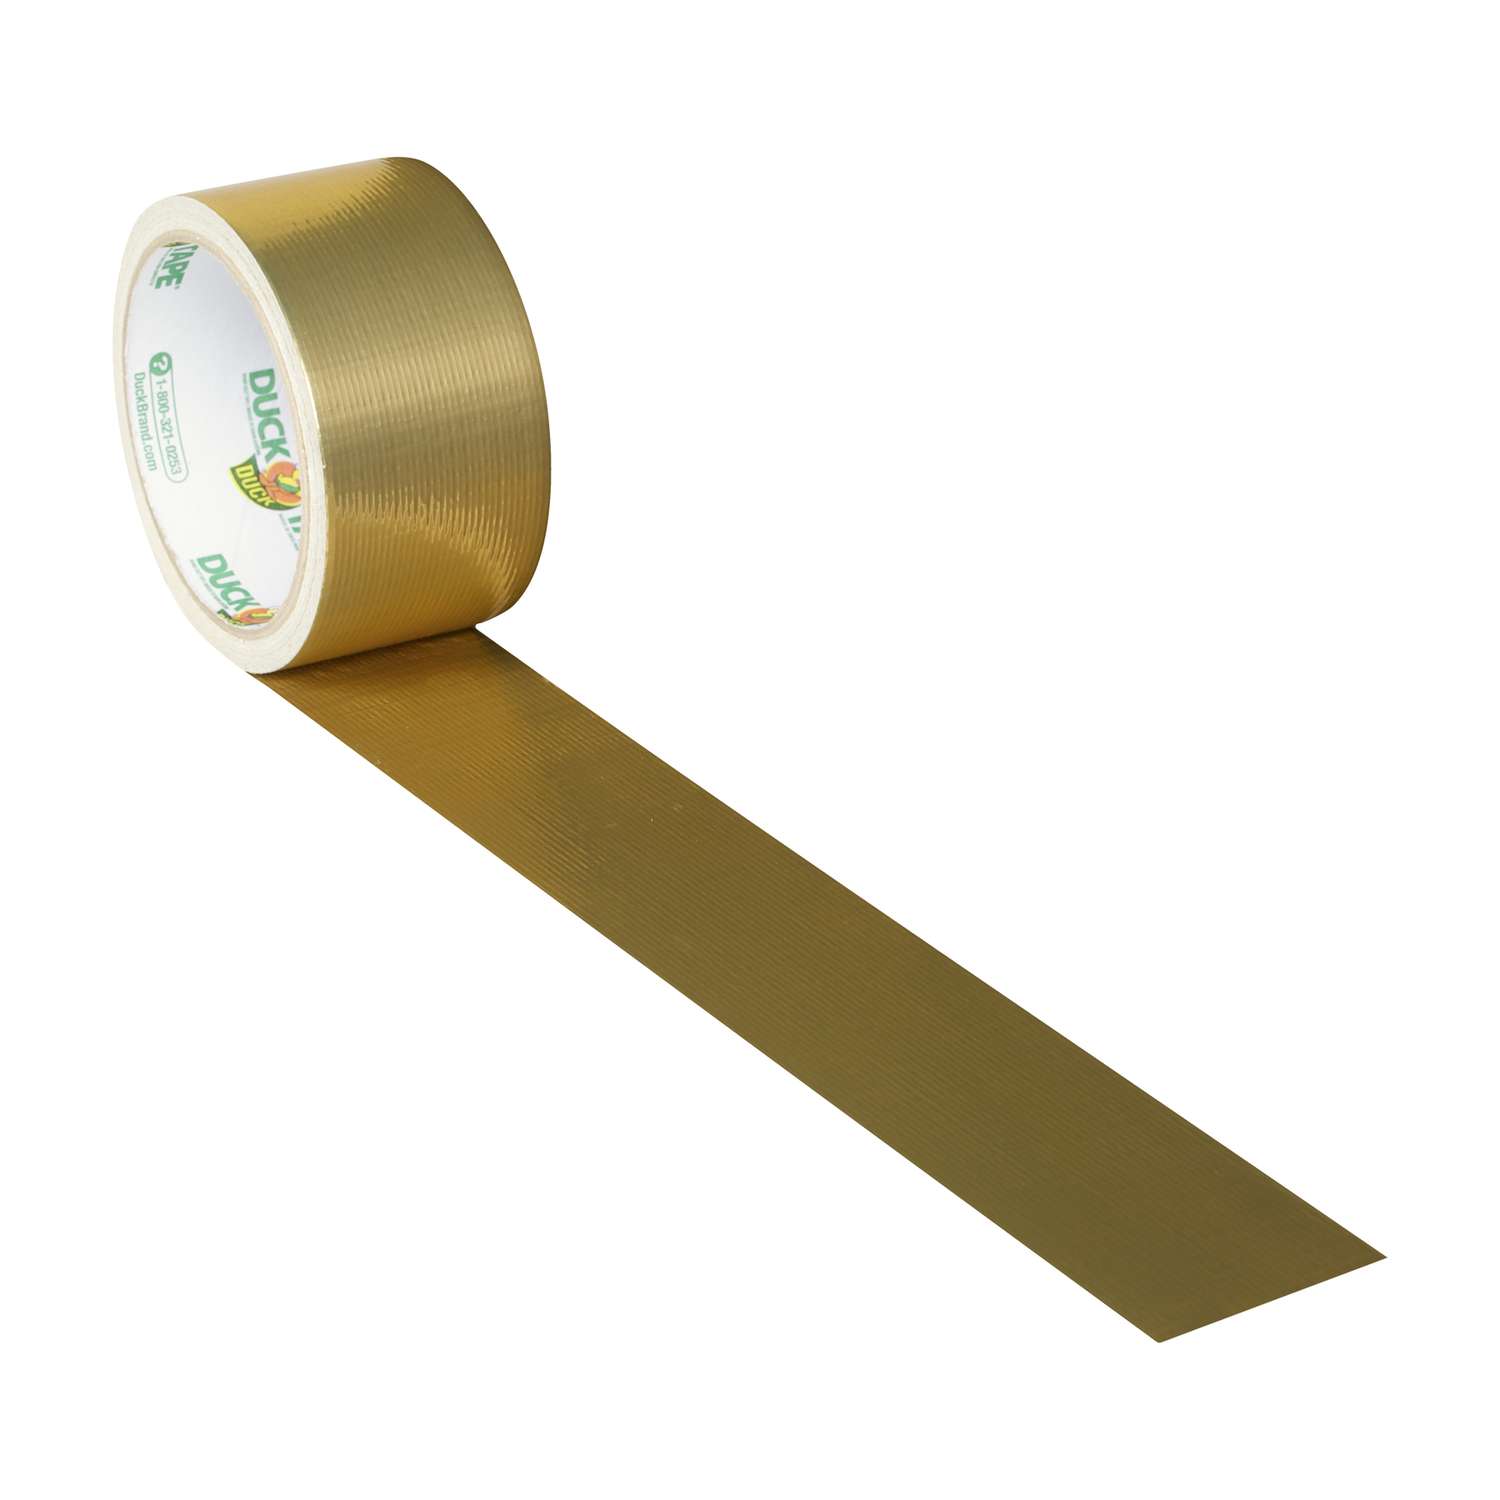 6 Rolls of Graphic Art Tape DIY Golden Mirror Tape Gold Decorative Tape  Metallic Mirror Wrapping Tape 